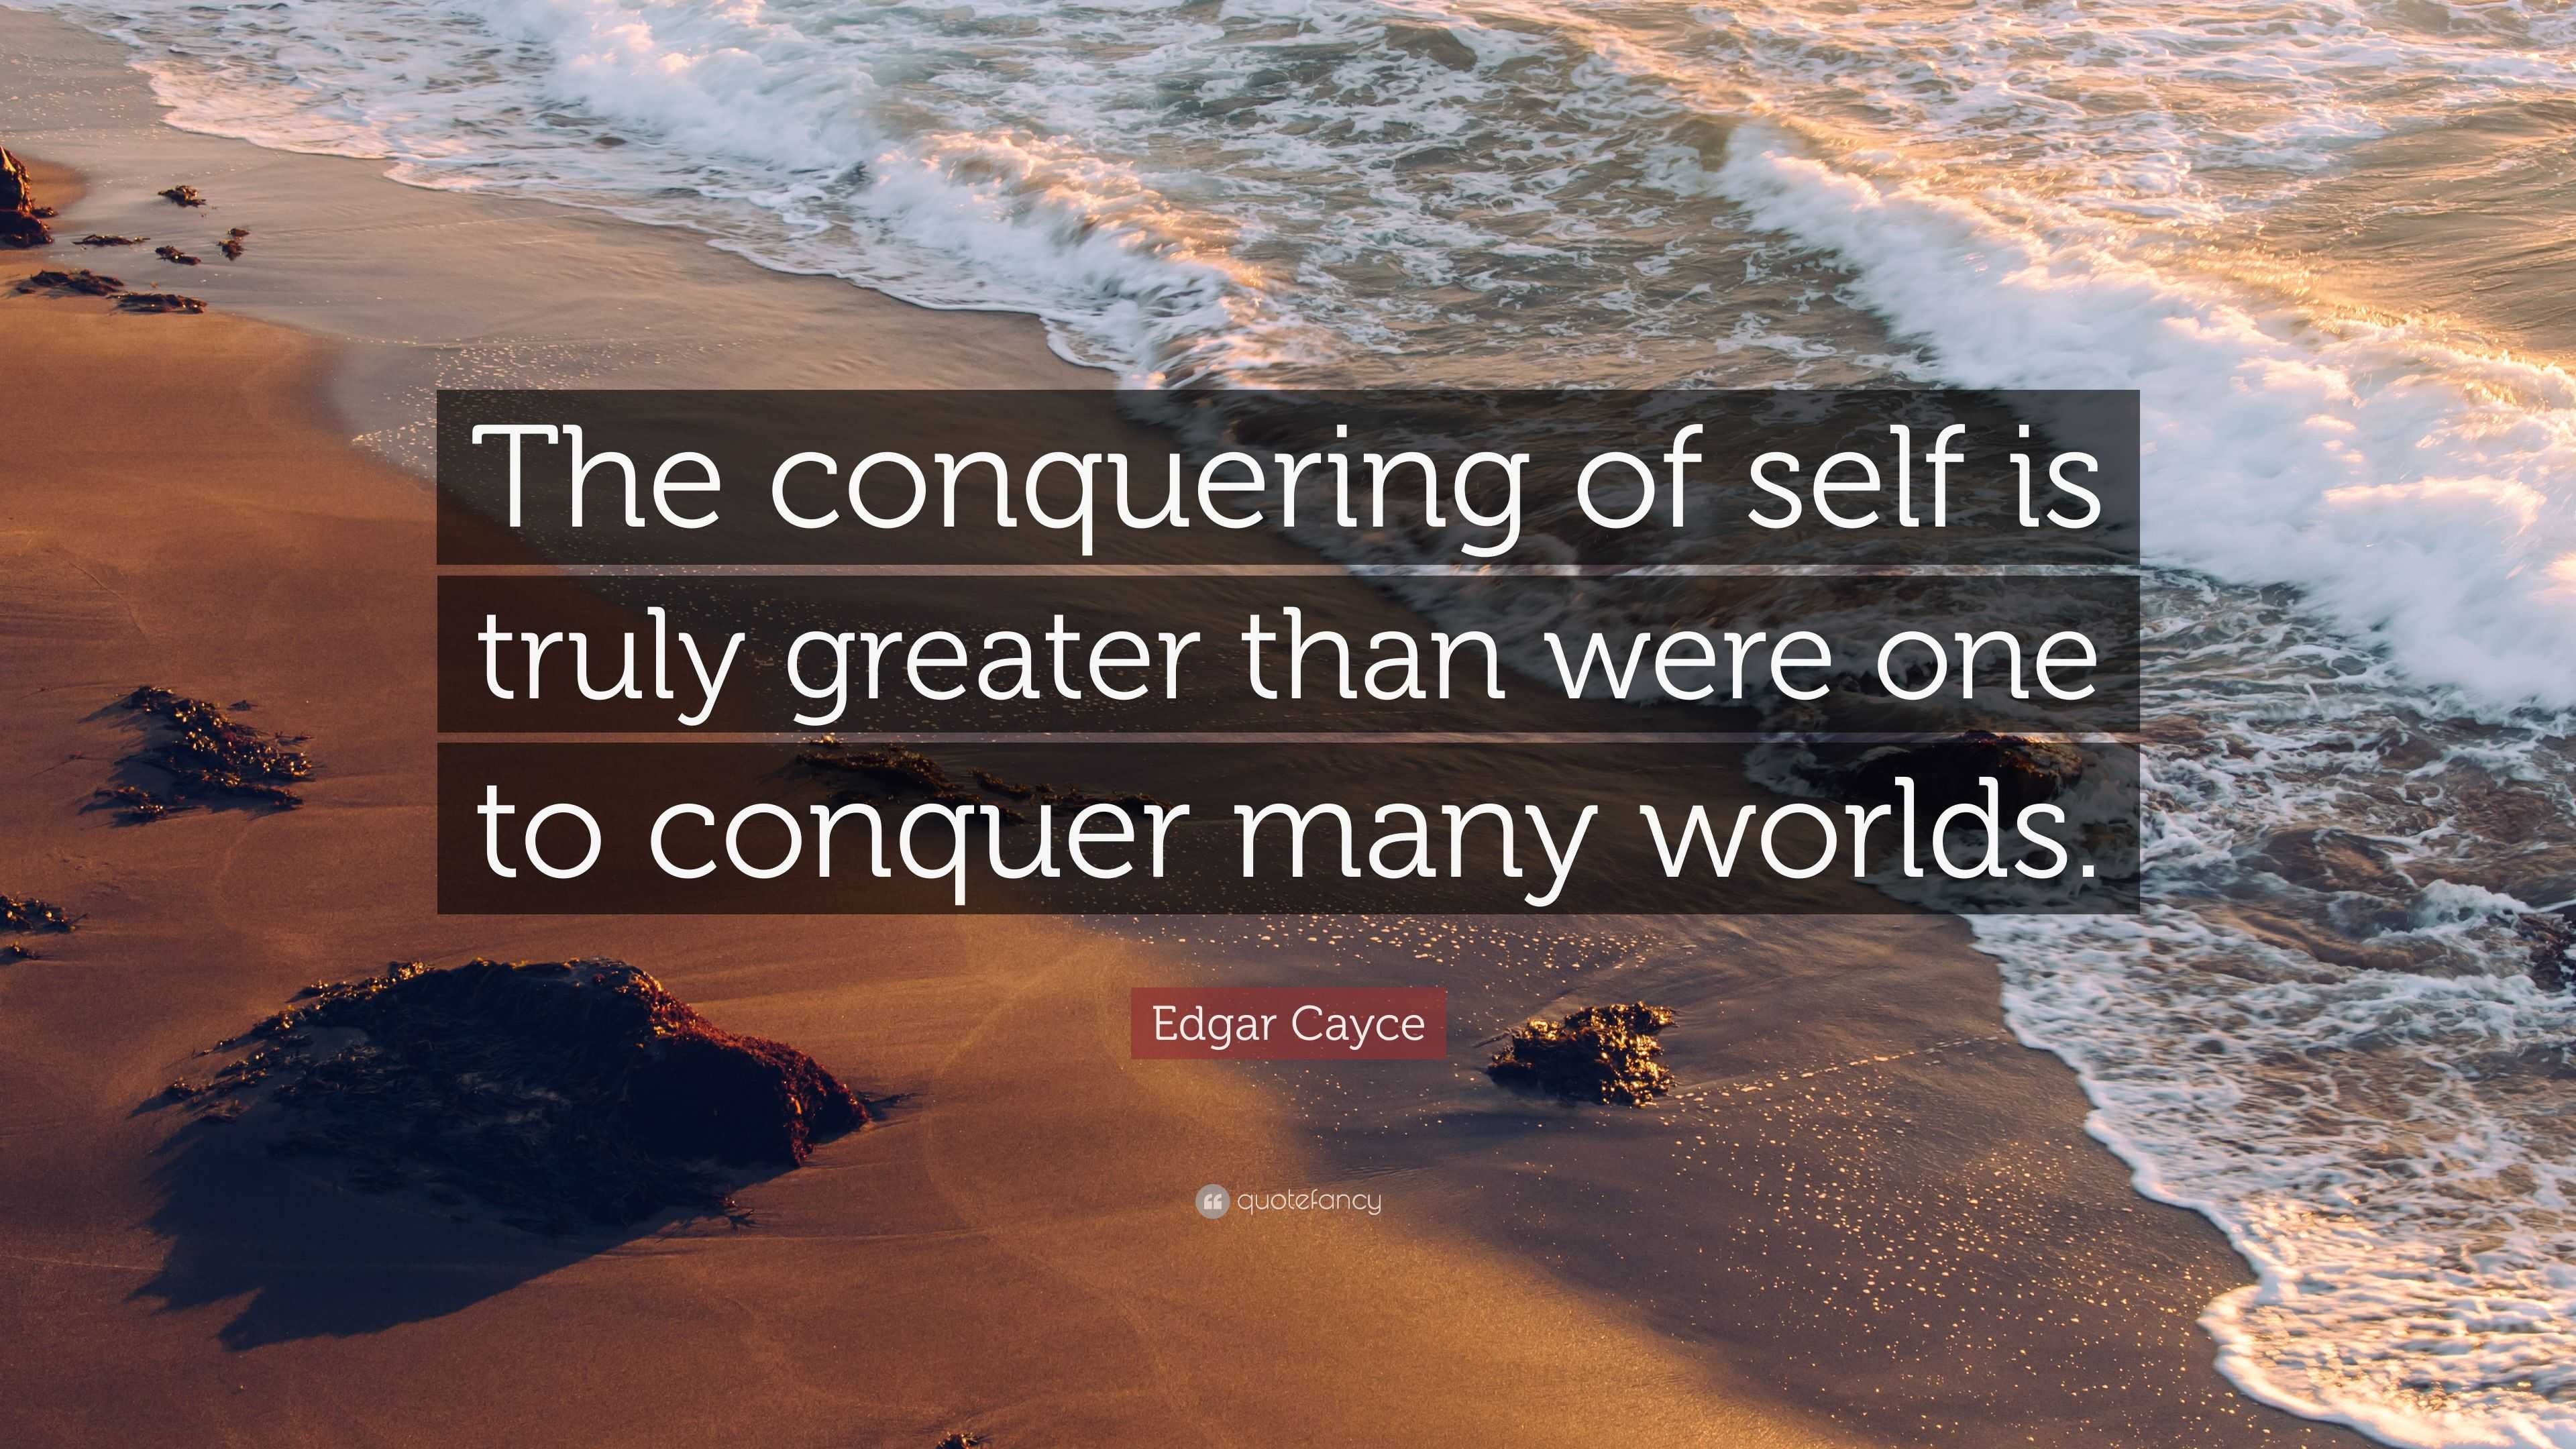 Edgar Cayce Quote: “The conquering of self is truly greater than were